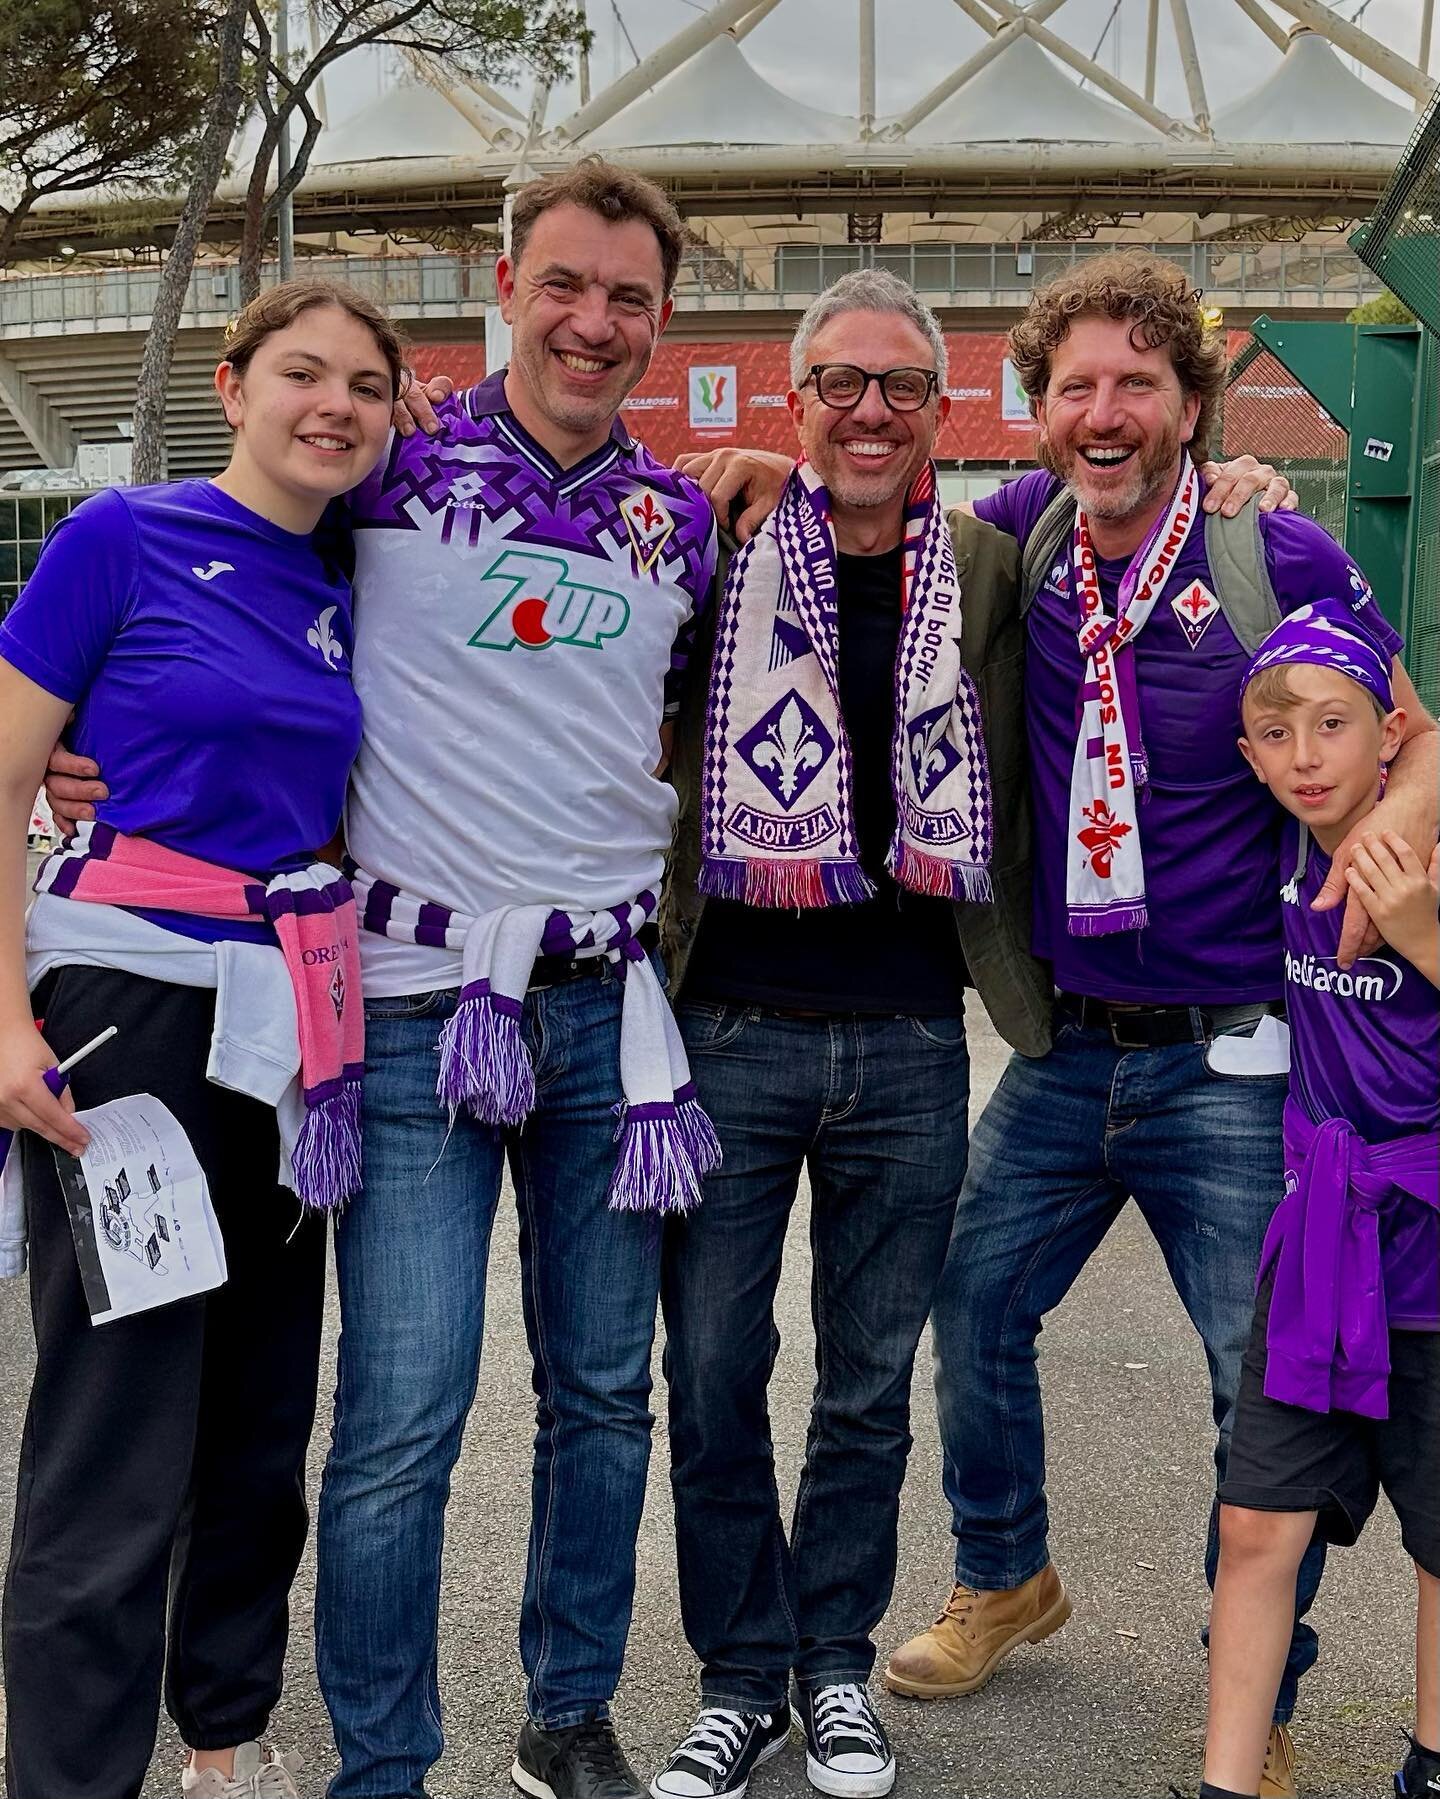 🙏🏼 ROMA. YOU&rsquo;RE ICONIC - DAJE! 

In and out for 💜 and 🍽️ 

⚽️ 65k people and run into my dearest @pruneti brothers - Olive Oil never fails to connect!

🍽️ mandatory Carbonara + Gricia  @rosciolisalumeria 

💜 Forever Forza Viola @europacnf